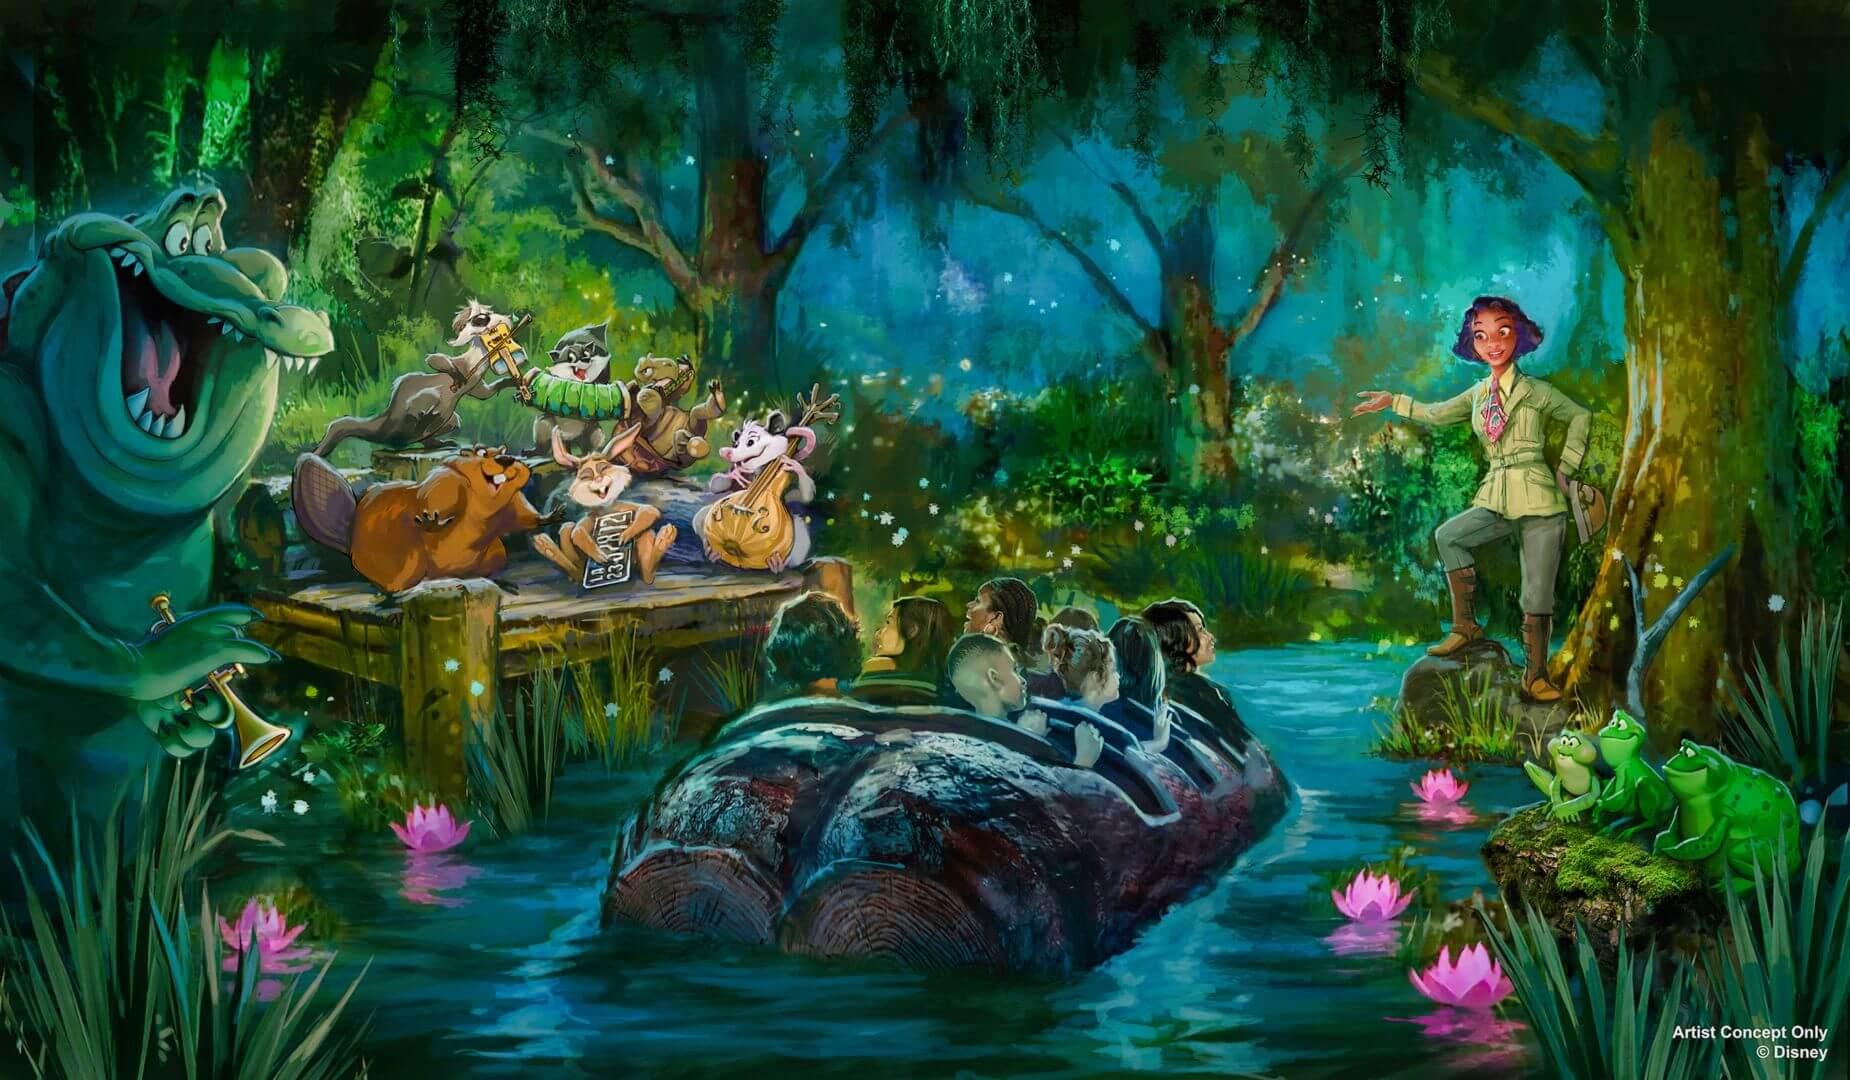 The Princess and the Frog ride at Disney Parks